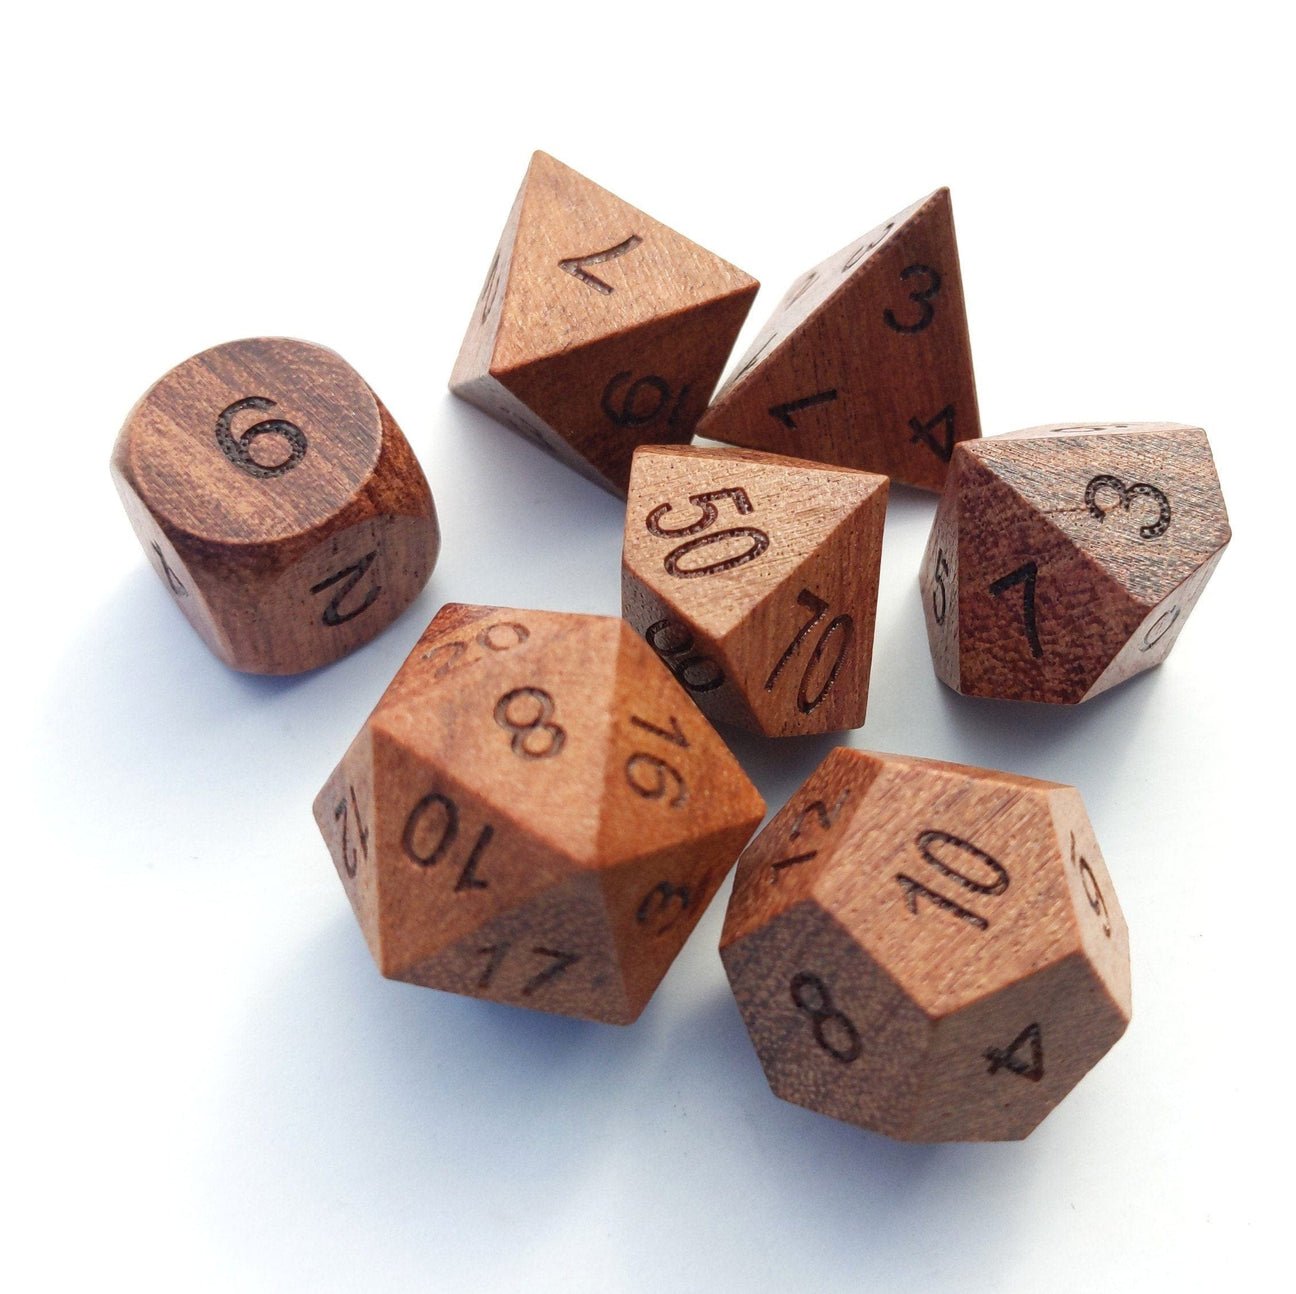 Rose Wood - 7 piece sharp-edge real wood dice set - The Fourth Place